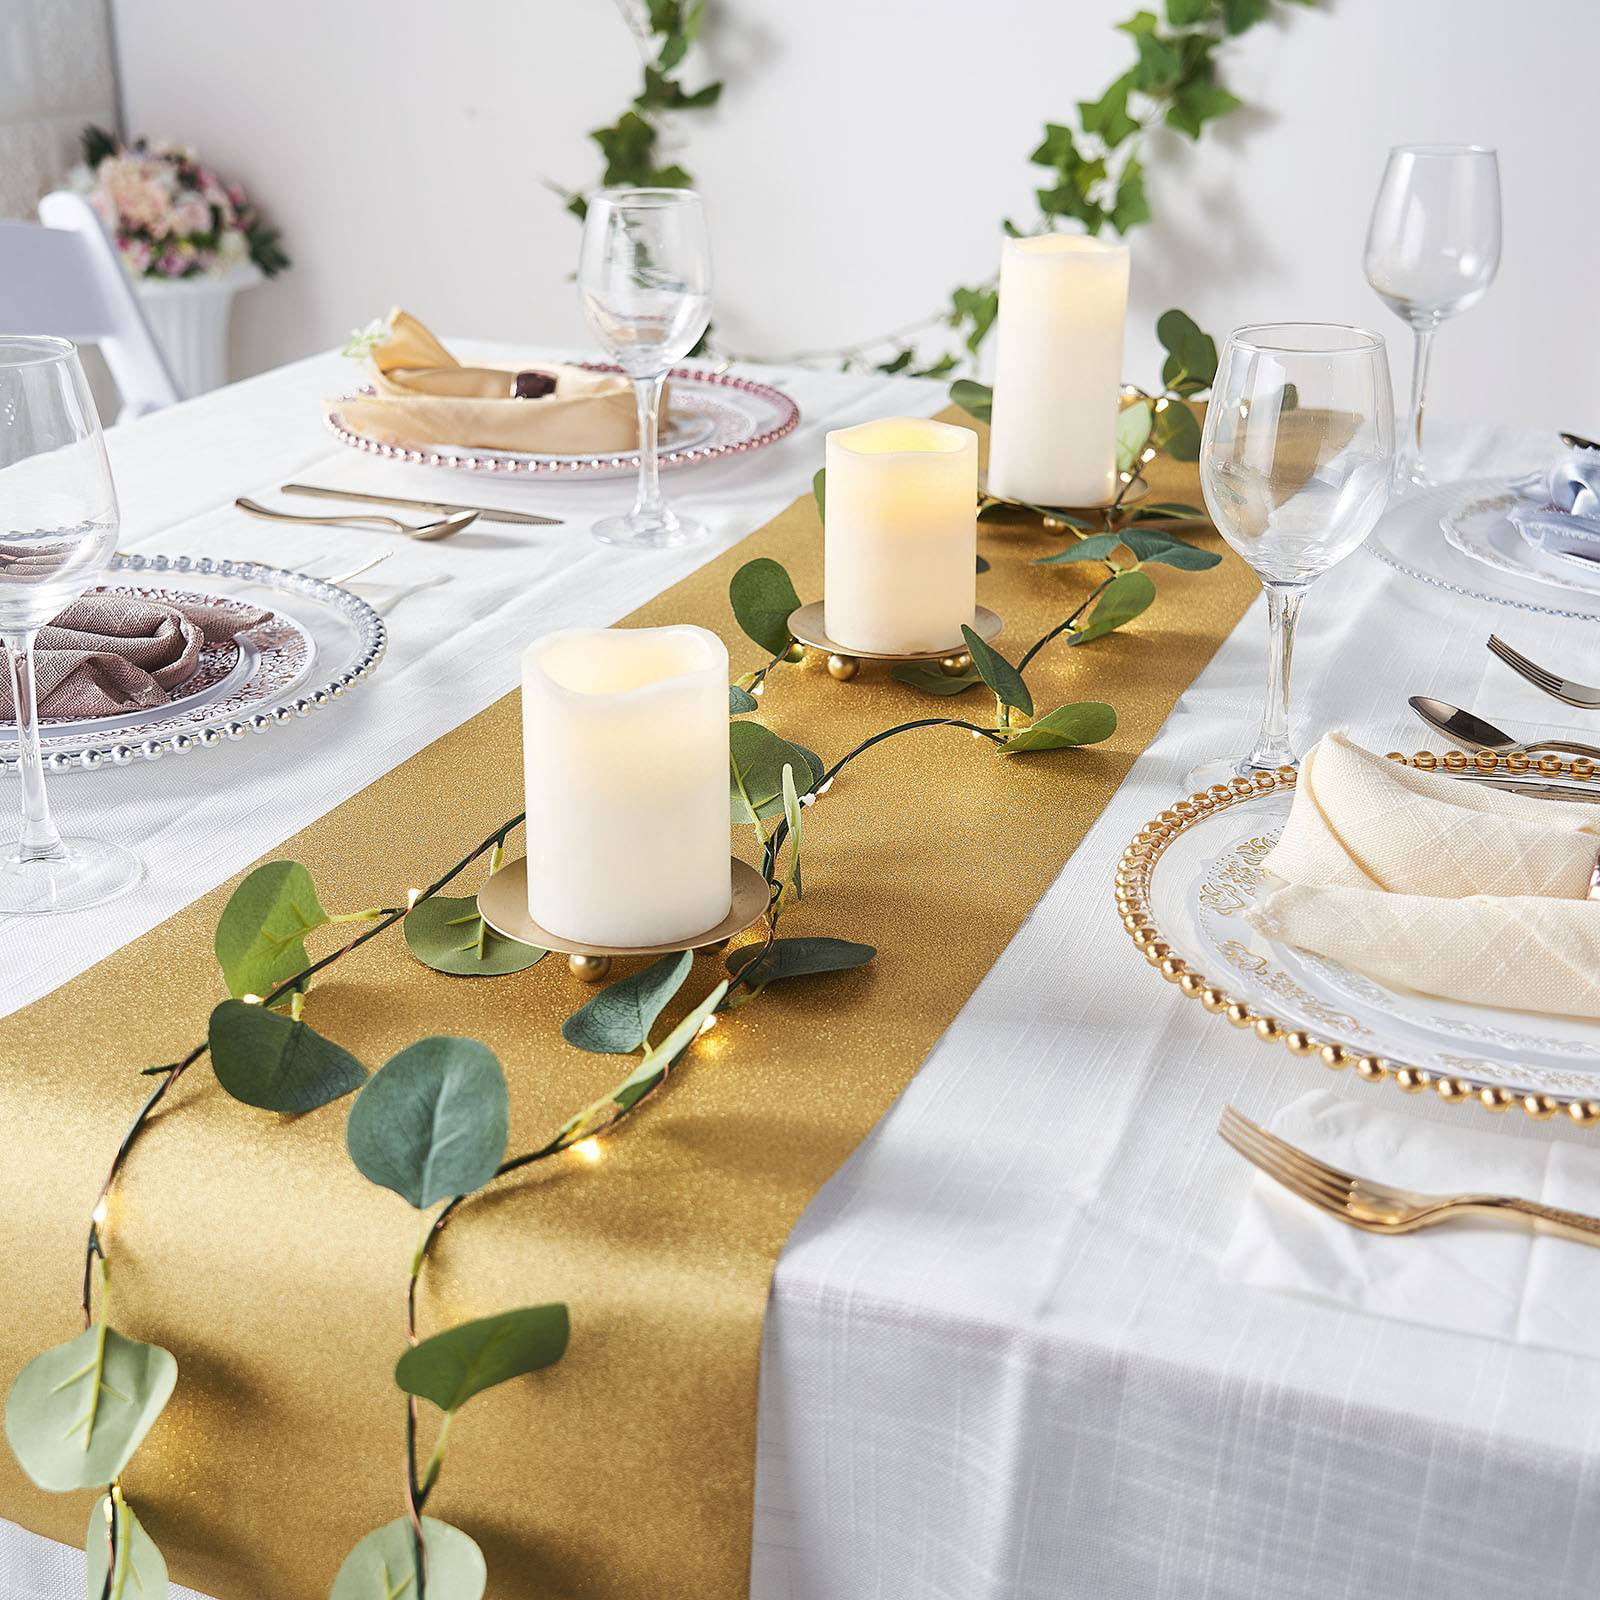 DII Woven Paper Table Runner - Gold - 72x14